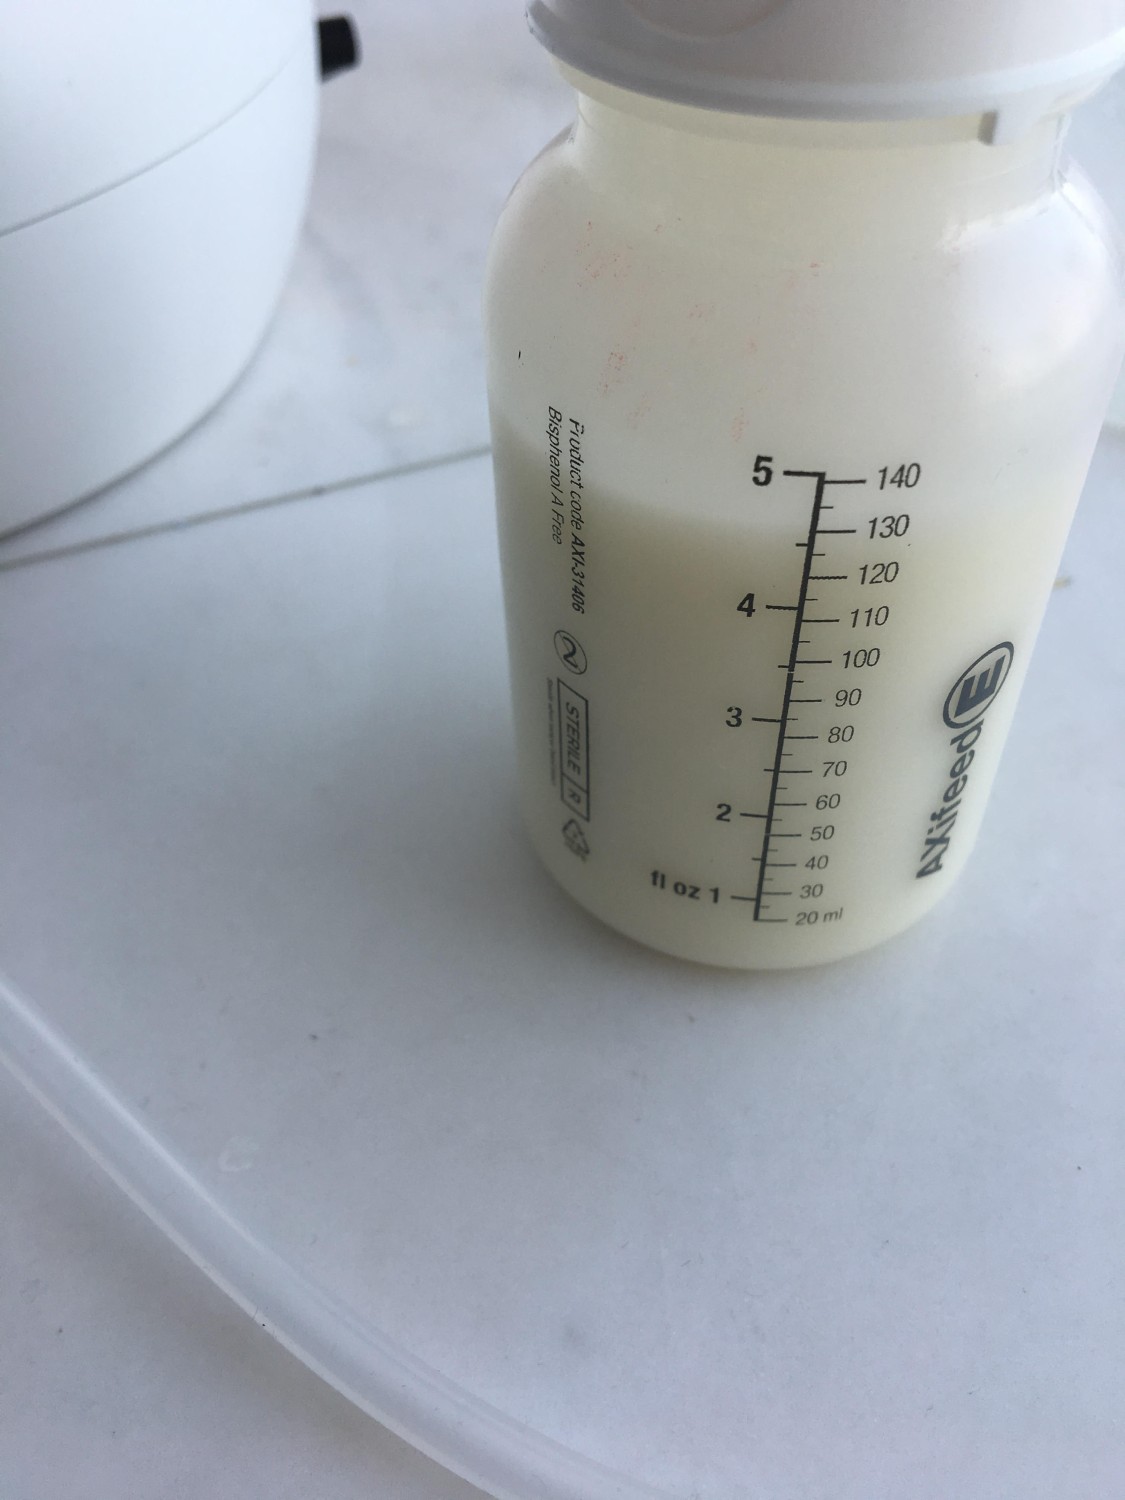 To give you some perspective, on any given day, pumping 130ml milk can take anywhere from 30 to 50mins. Sometimes I need to take a break to wait for it to come. Each time baby feeds, at 5 months ols, he needs 130-160ml